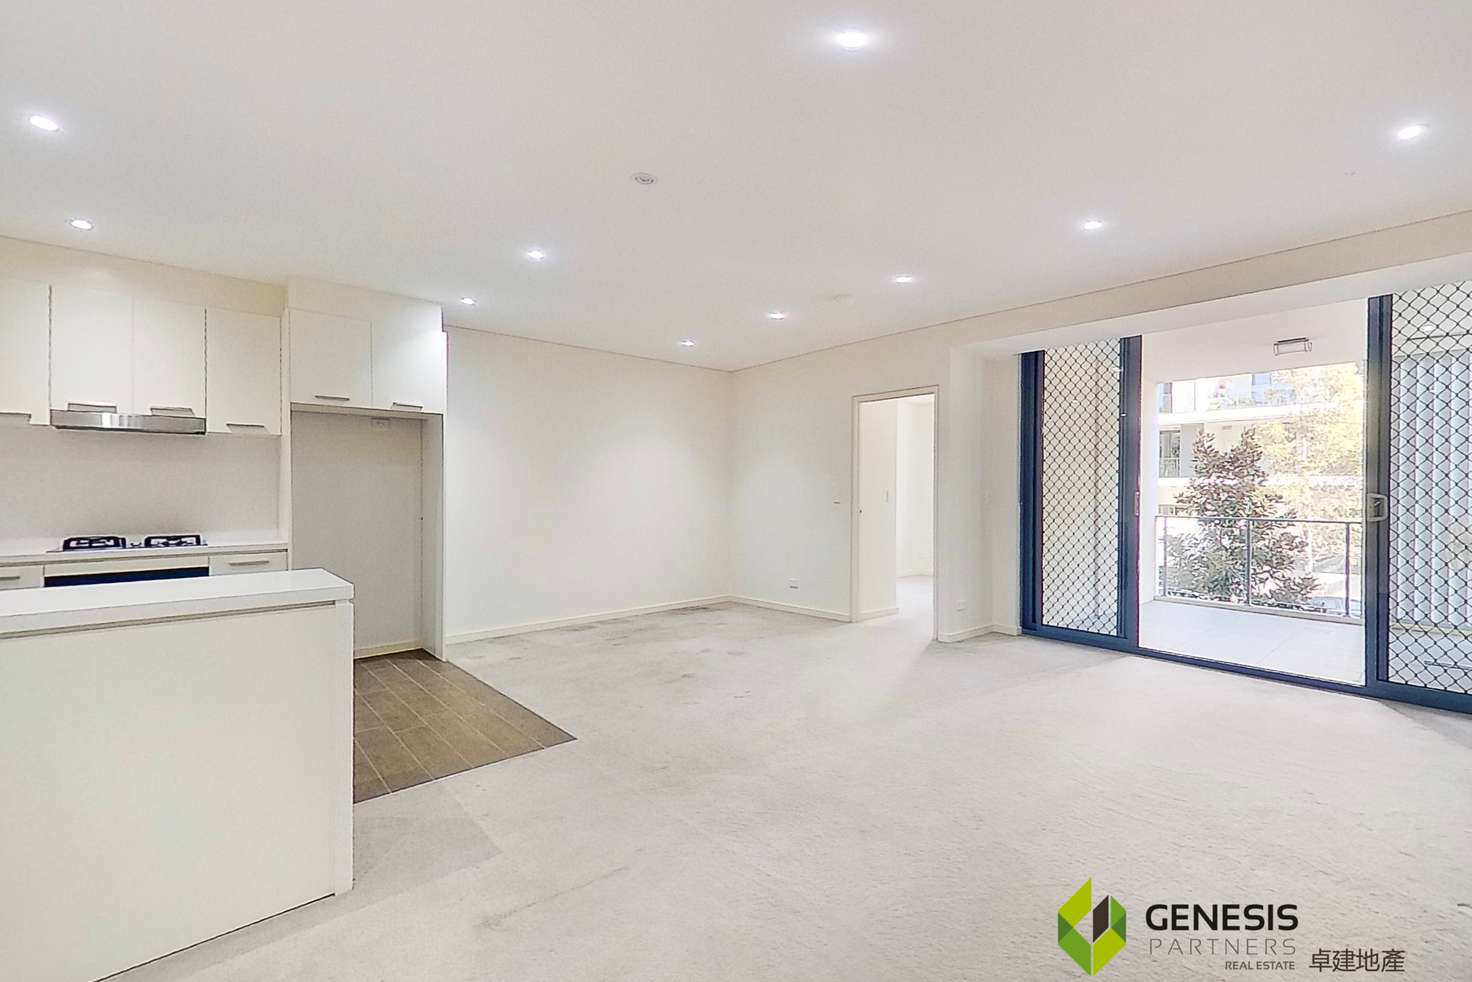 Main view of Homely apartment listing, 17/8 Angas Street, Meadowbank NSW 2114